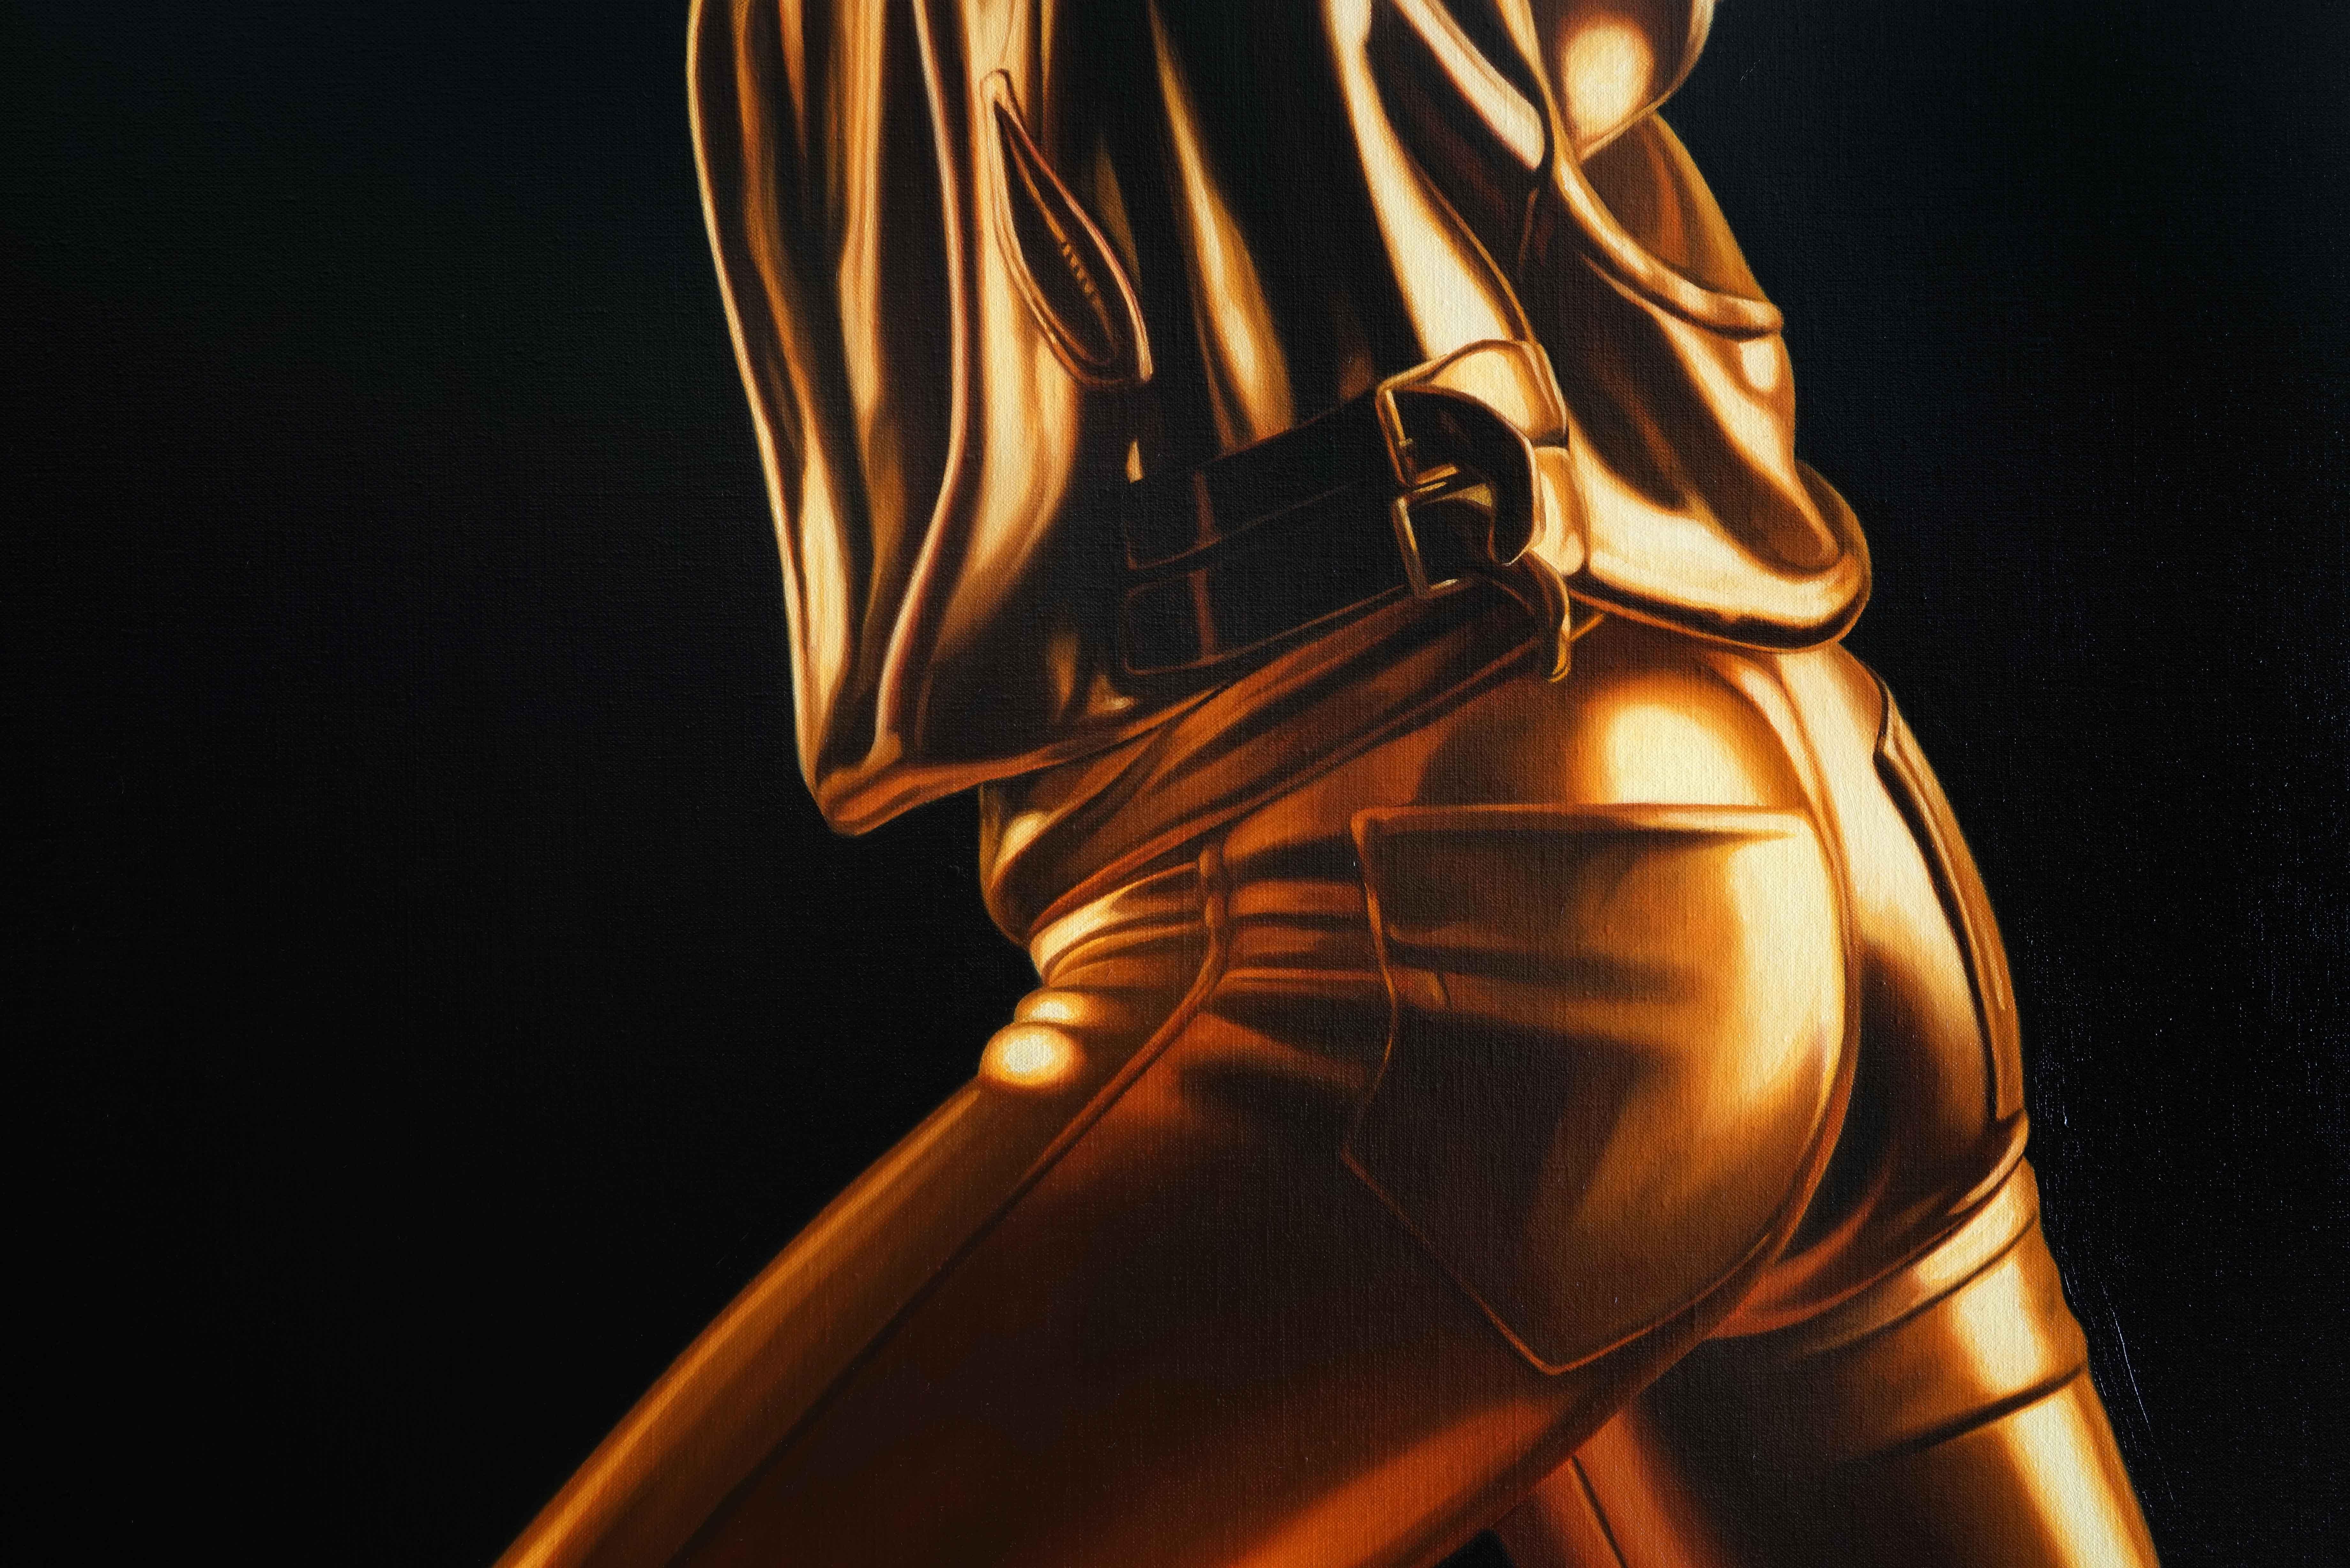 Model for statue 3 (gold) - Realist Painting by Kepa Garraza